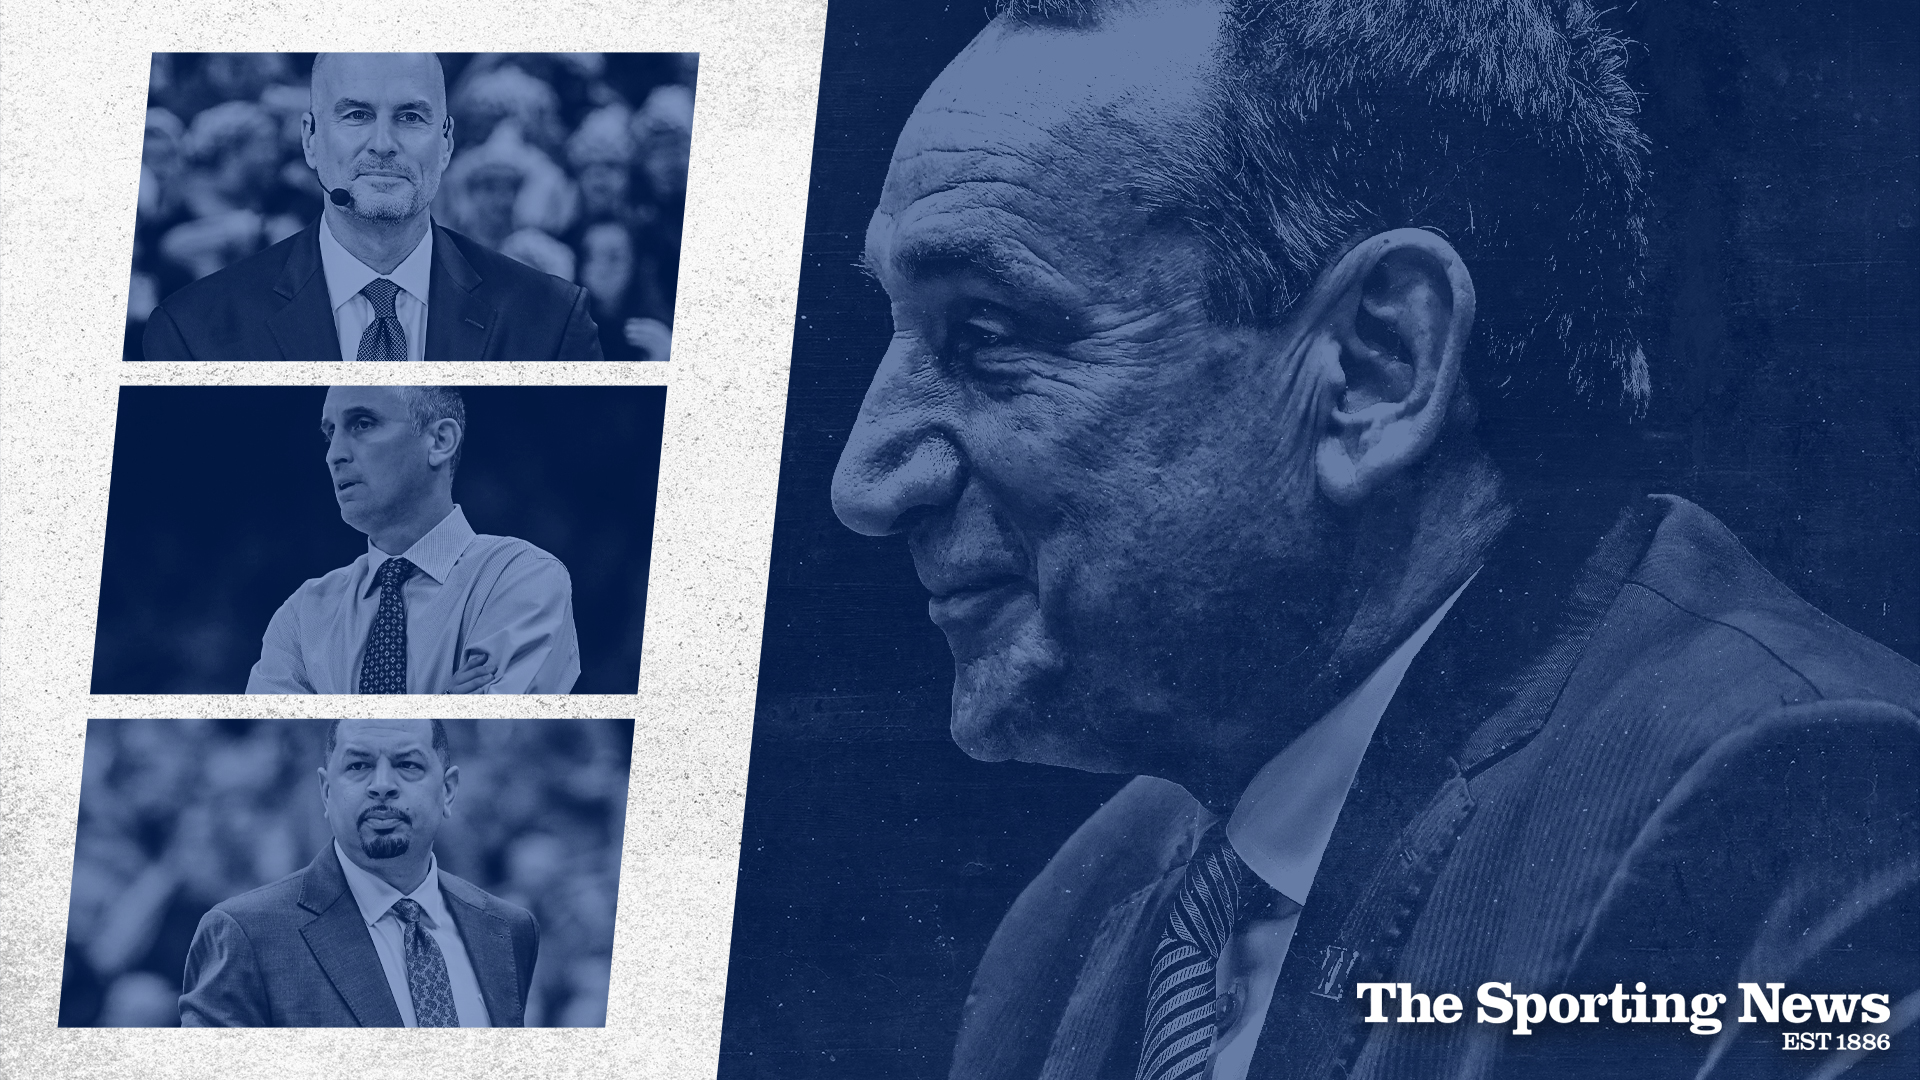 Selling Himself: What it was like to be recruited by Mike Krzyzewski before and after he became a Duke legend